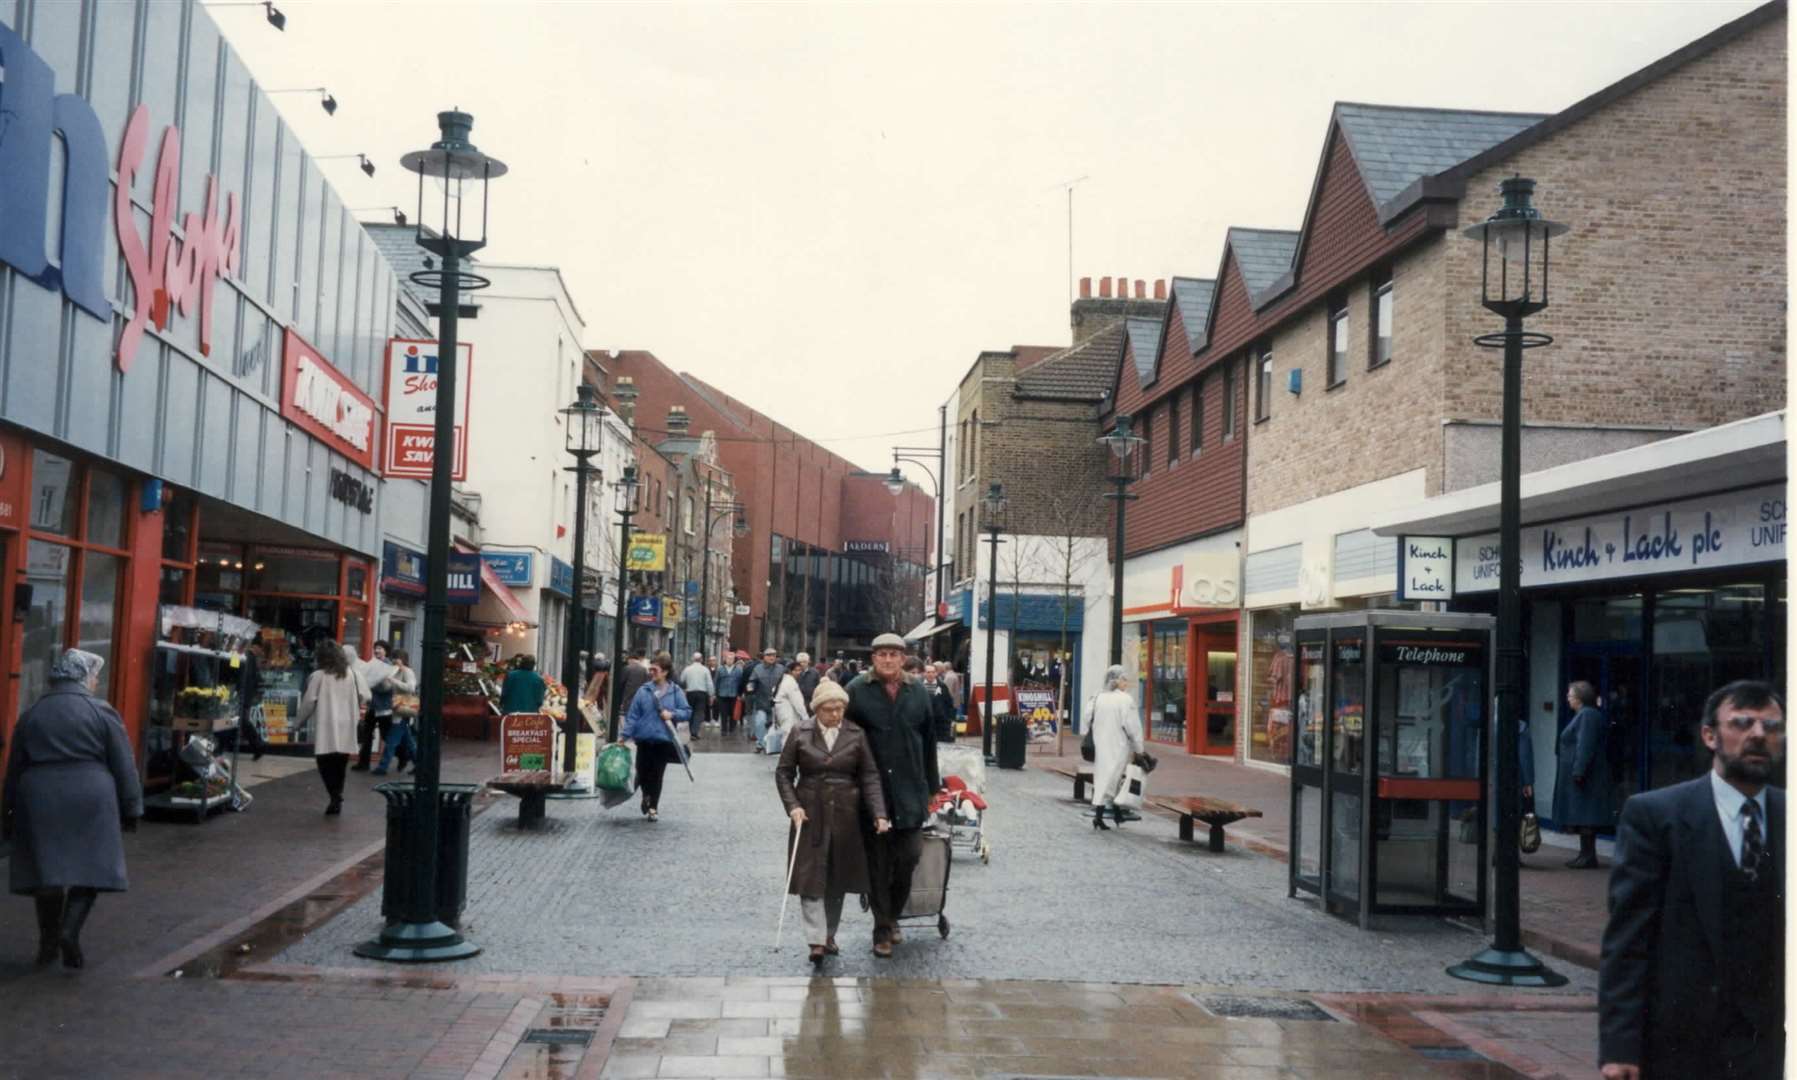 Chatham High Street in 1994. InShops on the left of the picture later became the Trafalgar Centre, which has been empty for several years